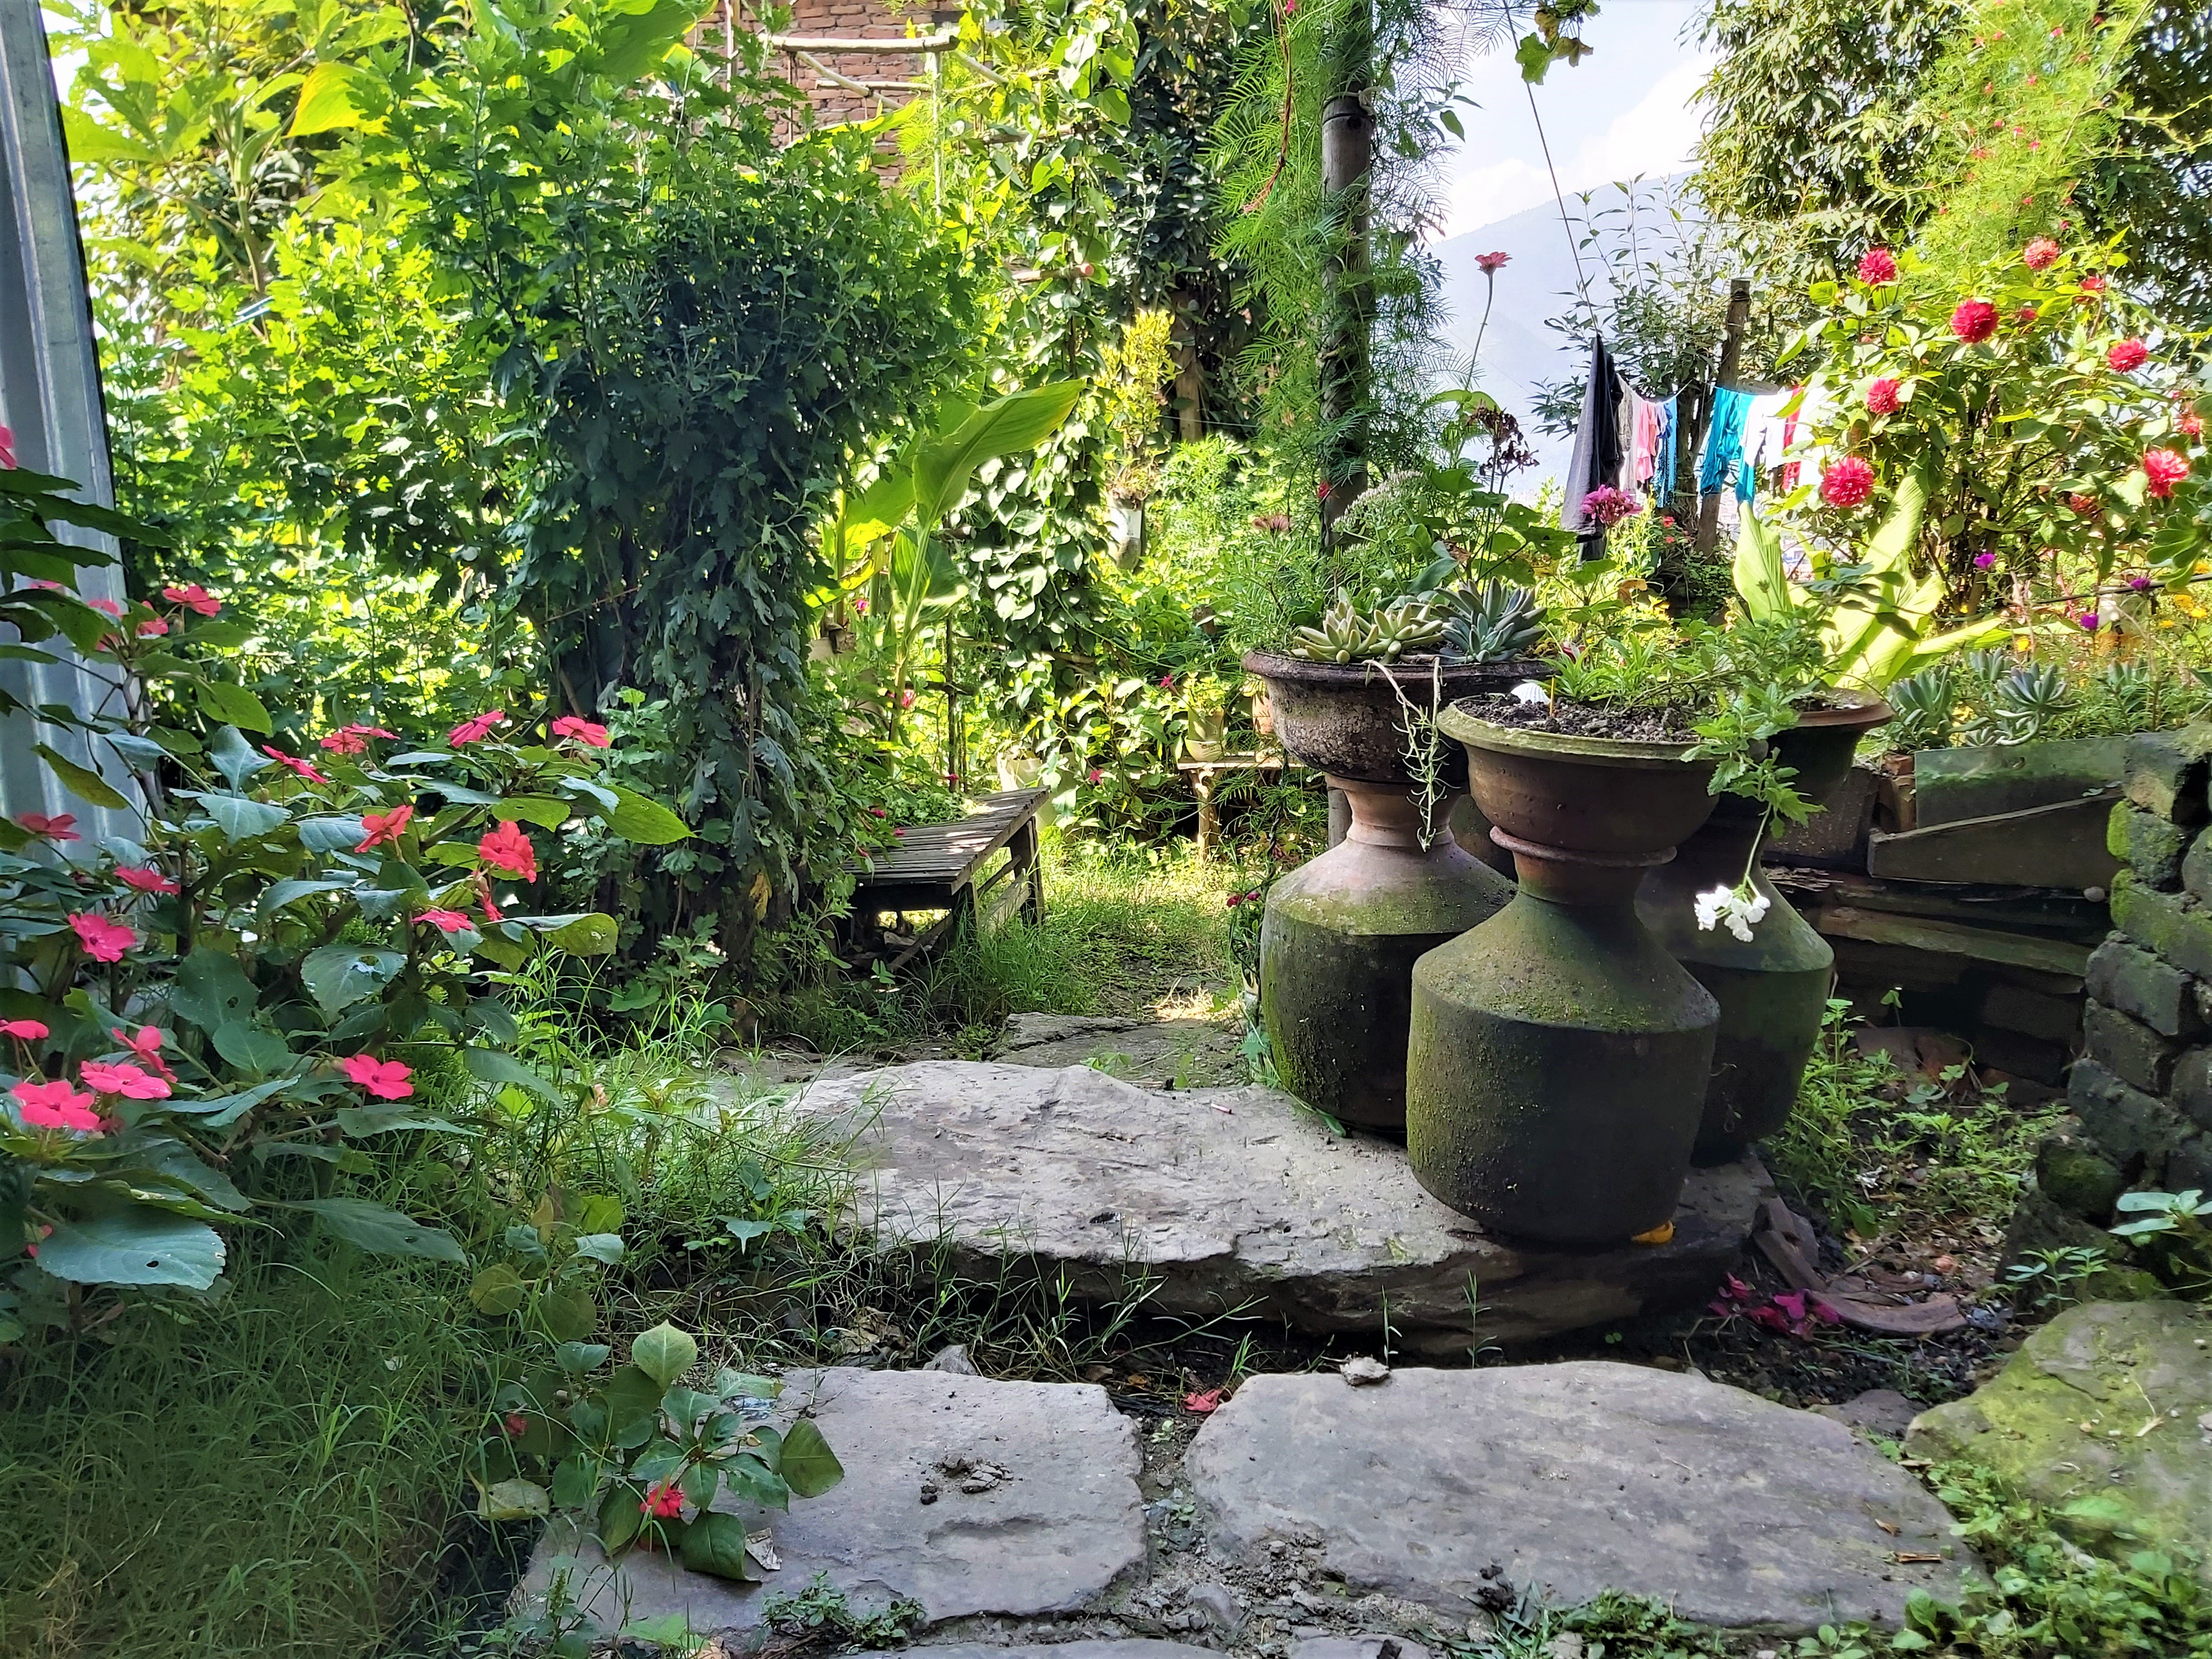 Small flower garden with antique large vases/containers